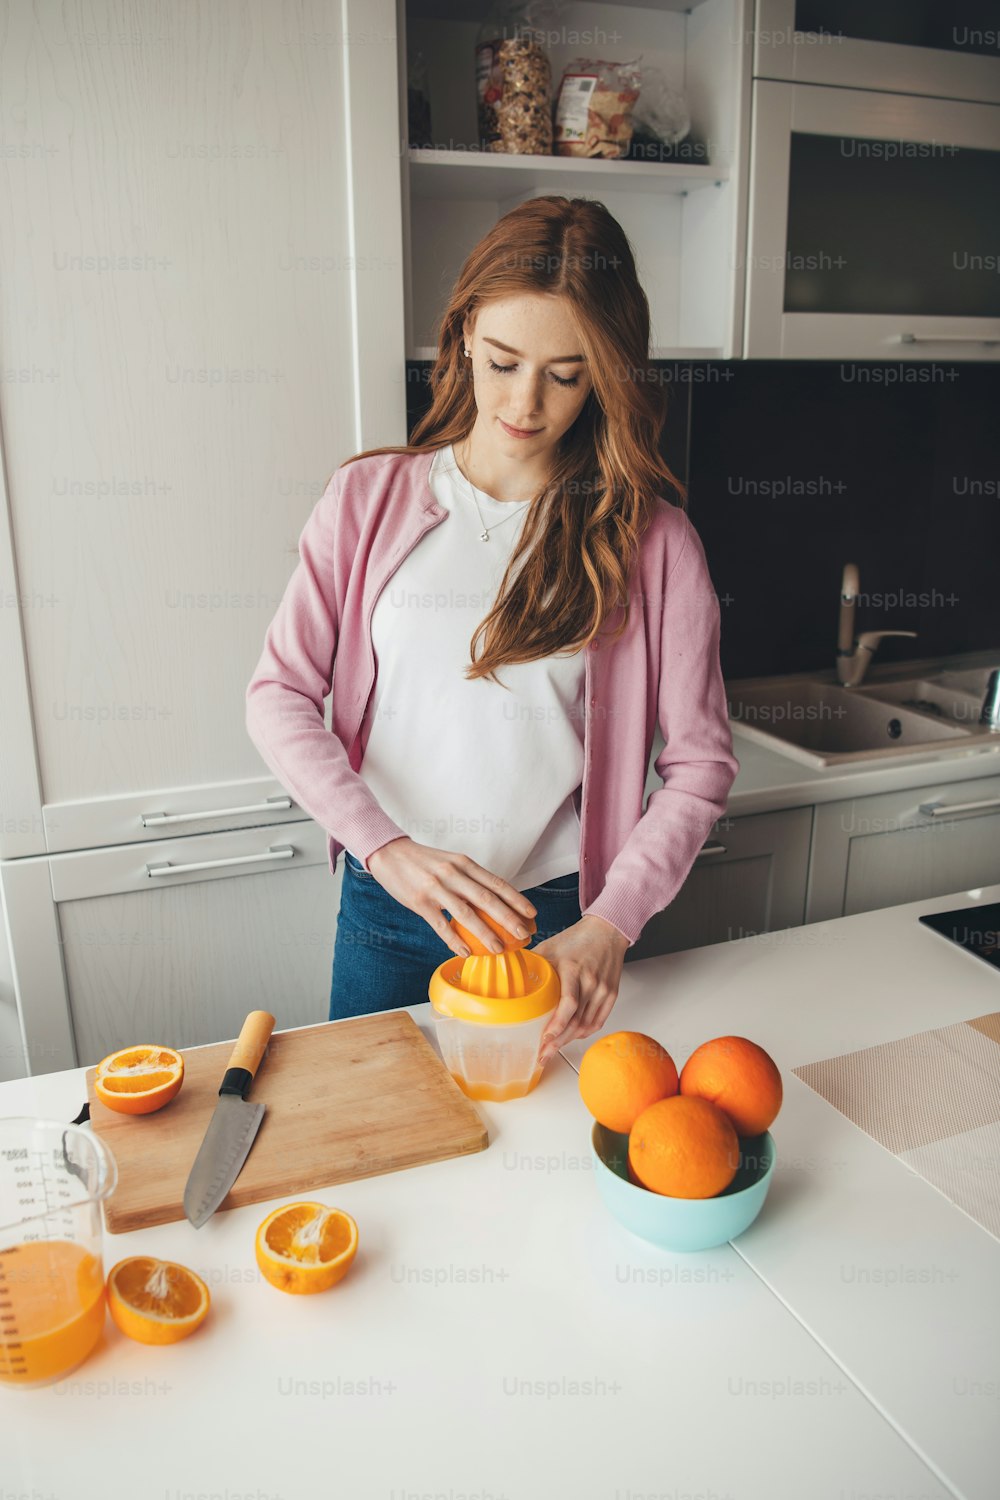 ginger woman with freckles is squeezing natural orange juice at home in the kitchen